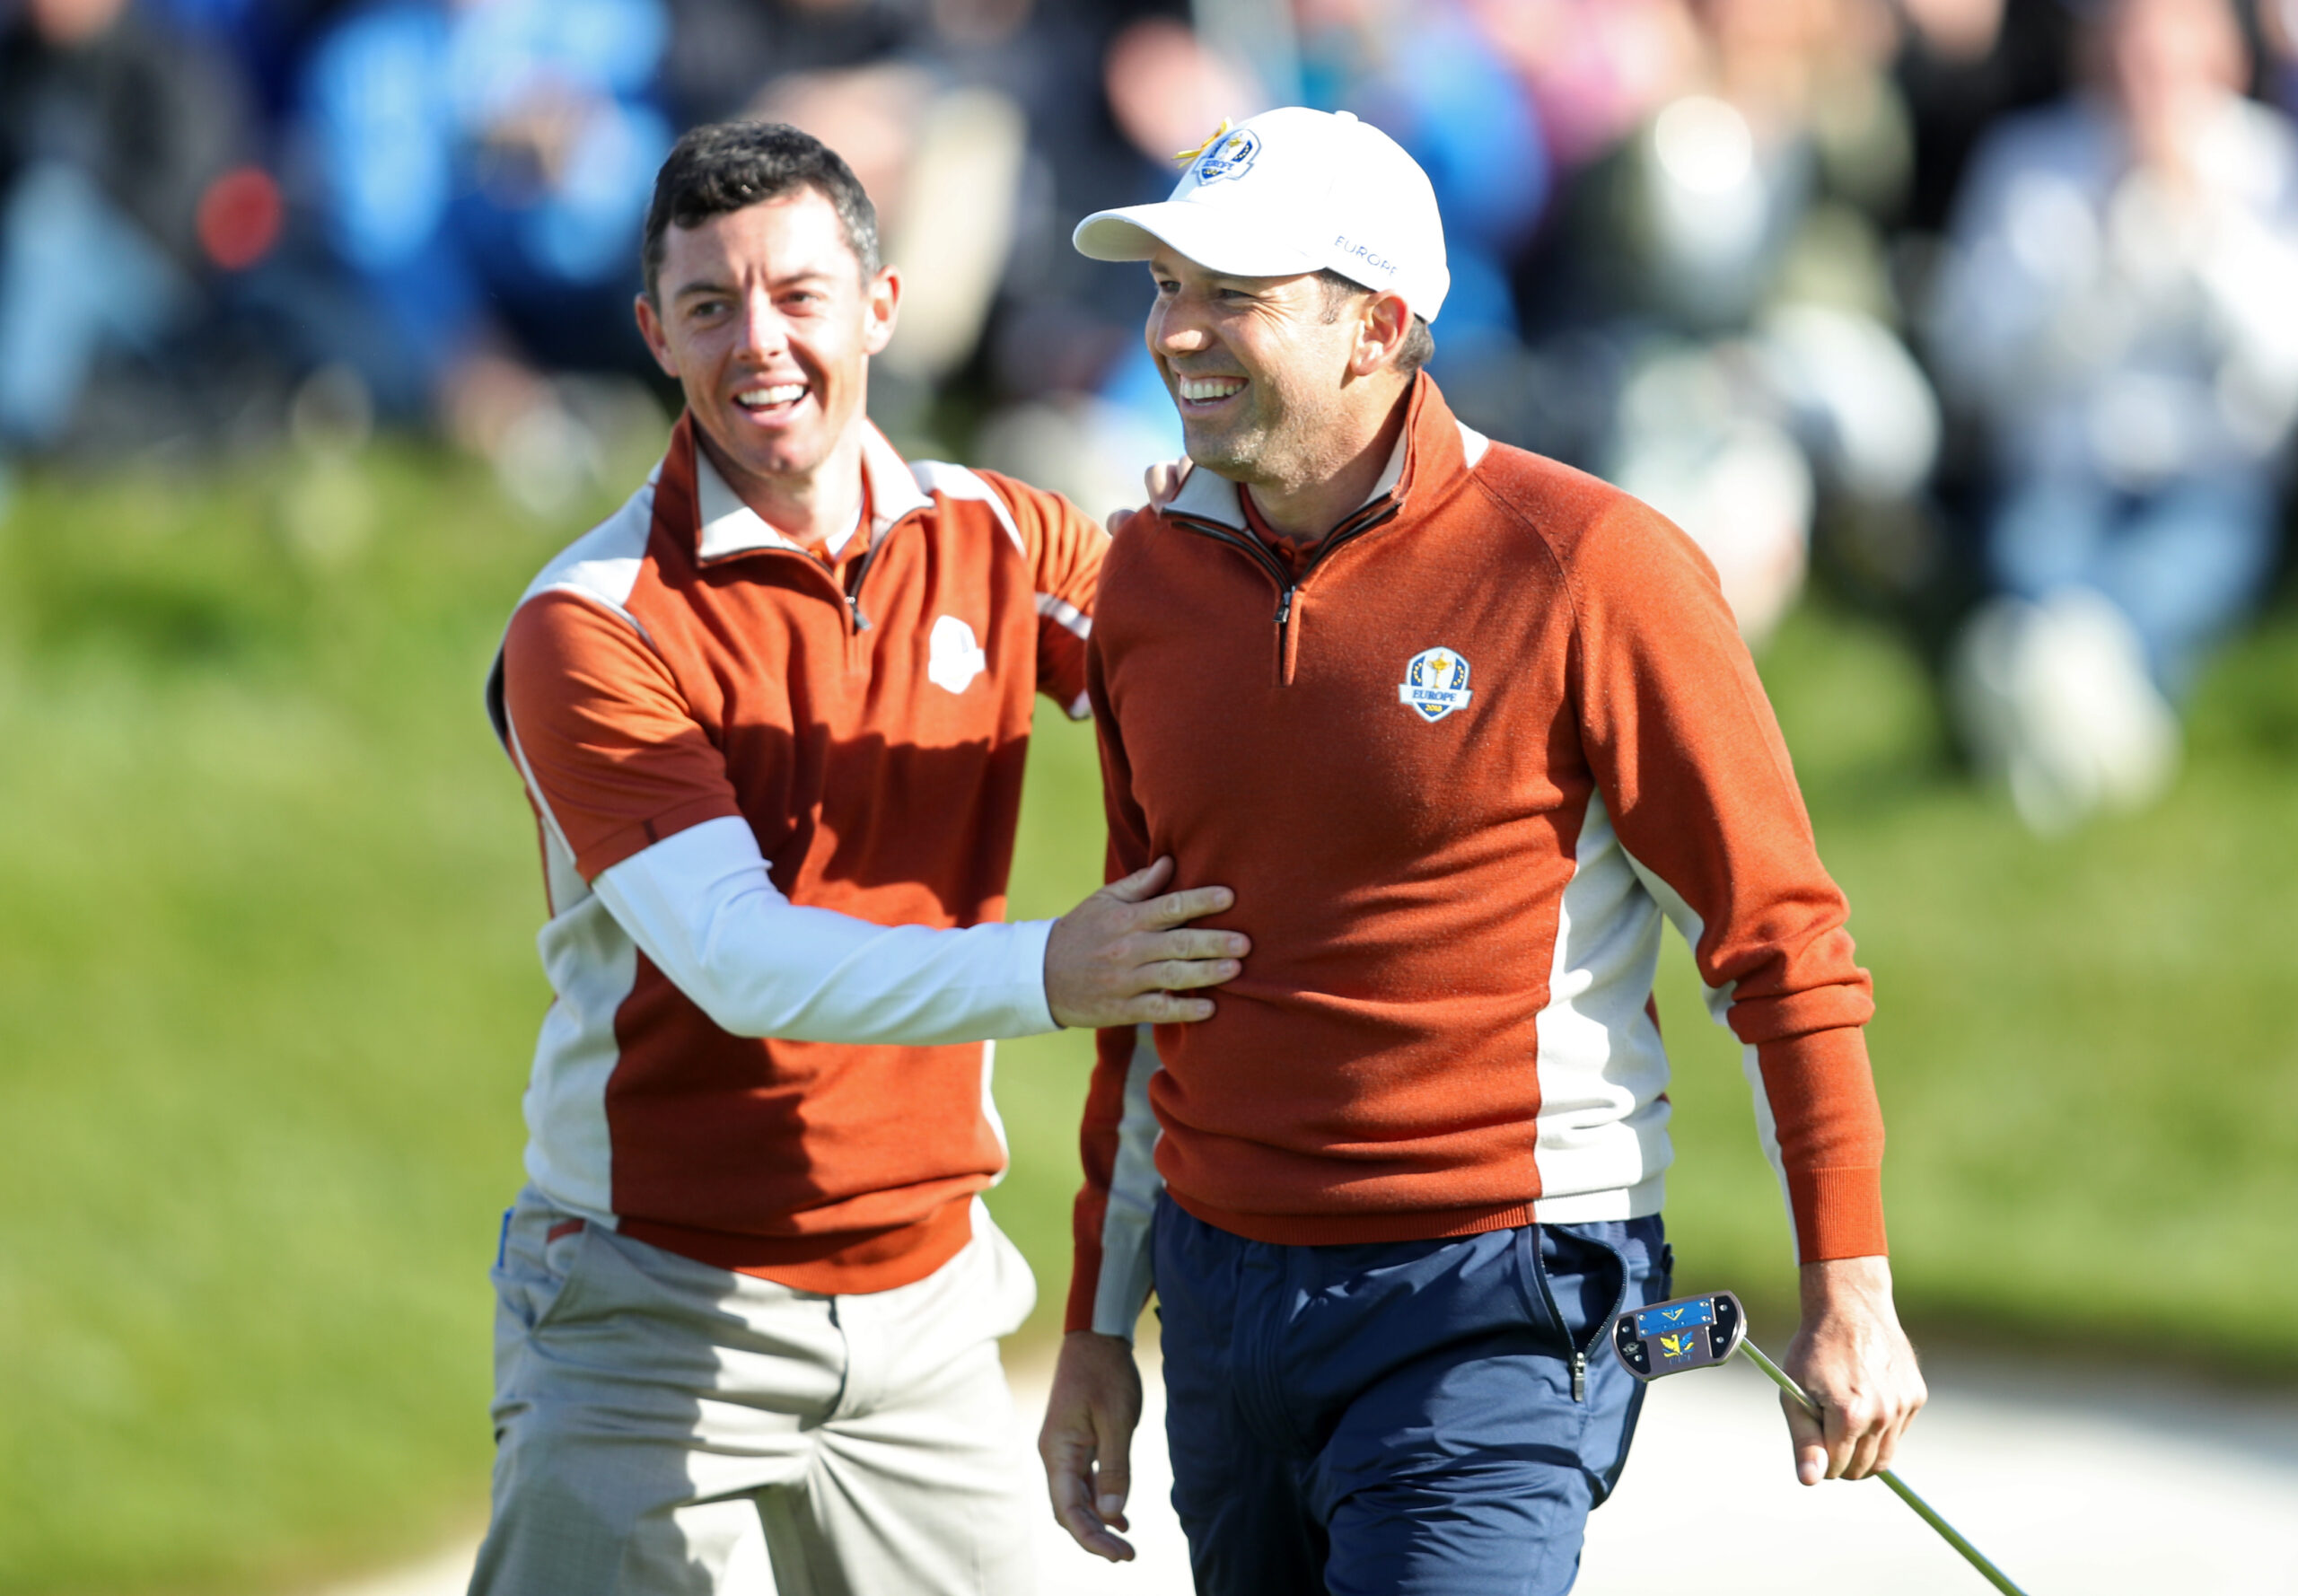 Sergio Garcia says feud with Rory McIlroy is over